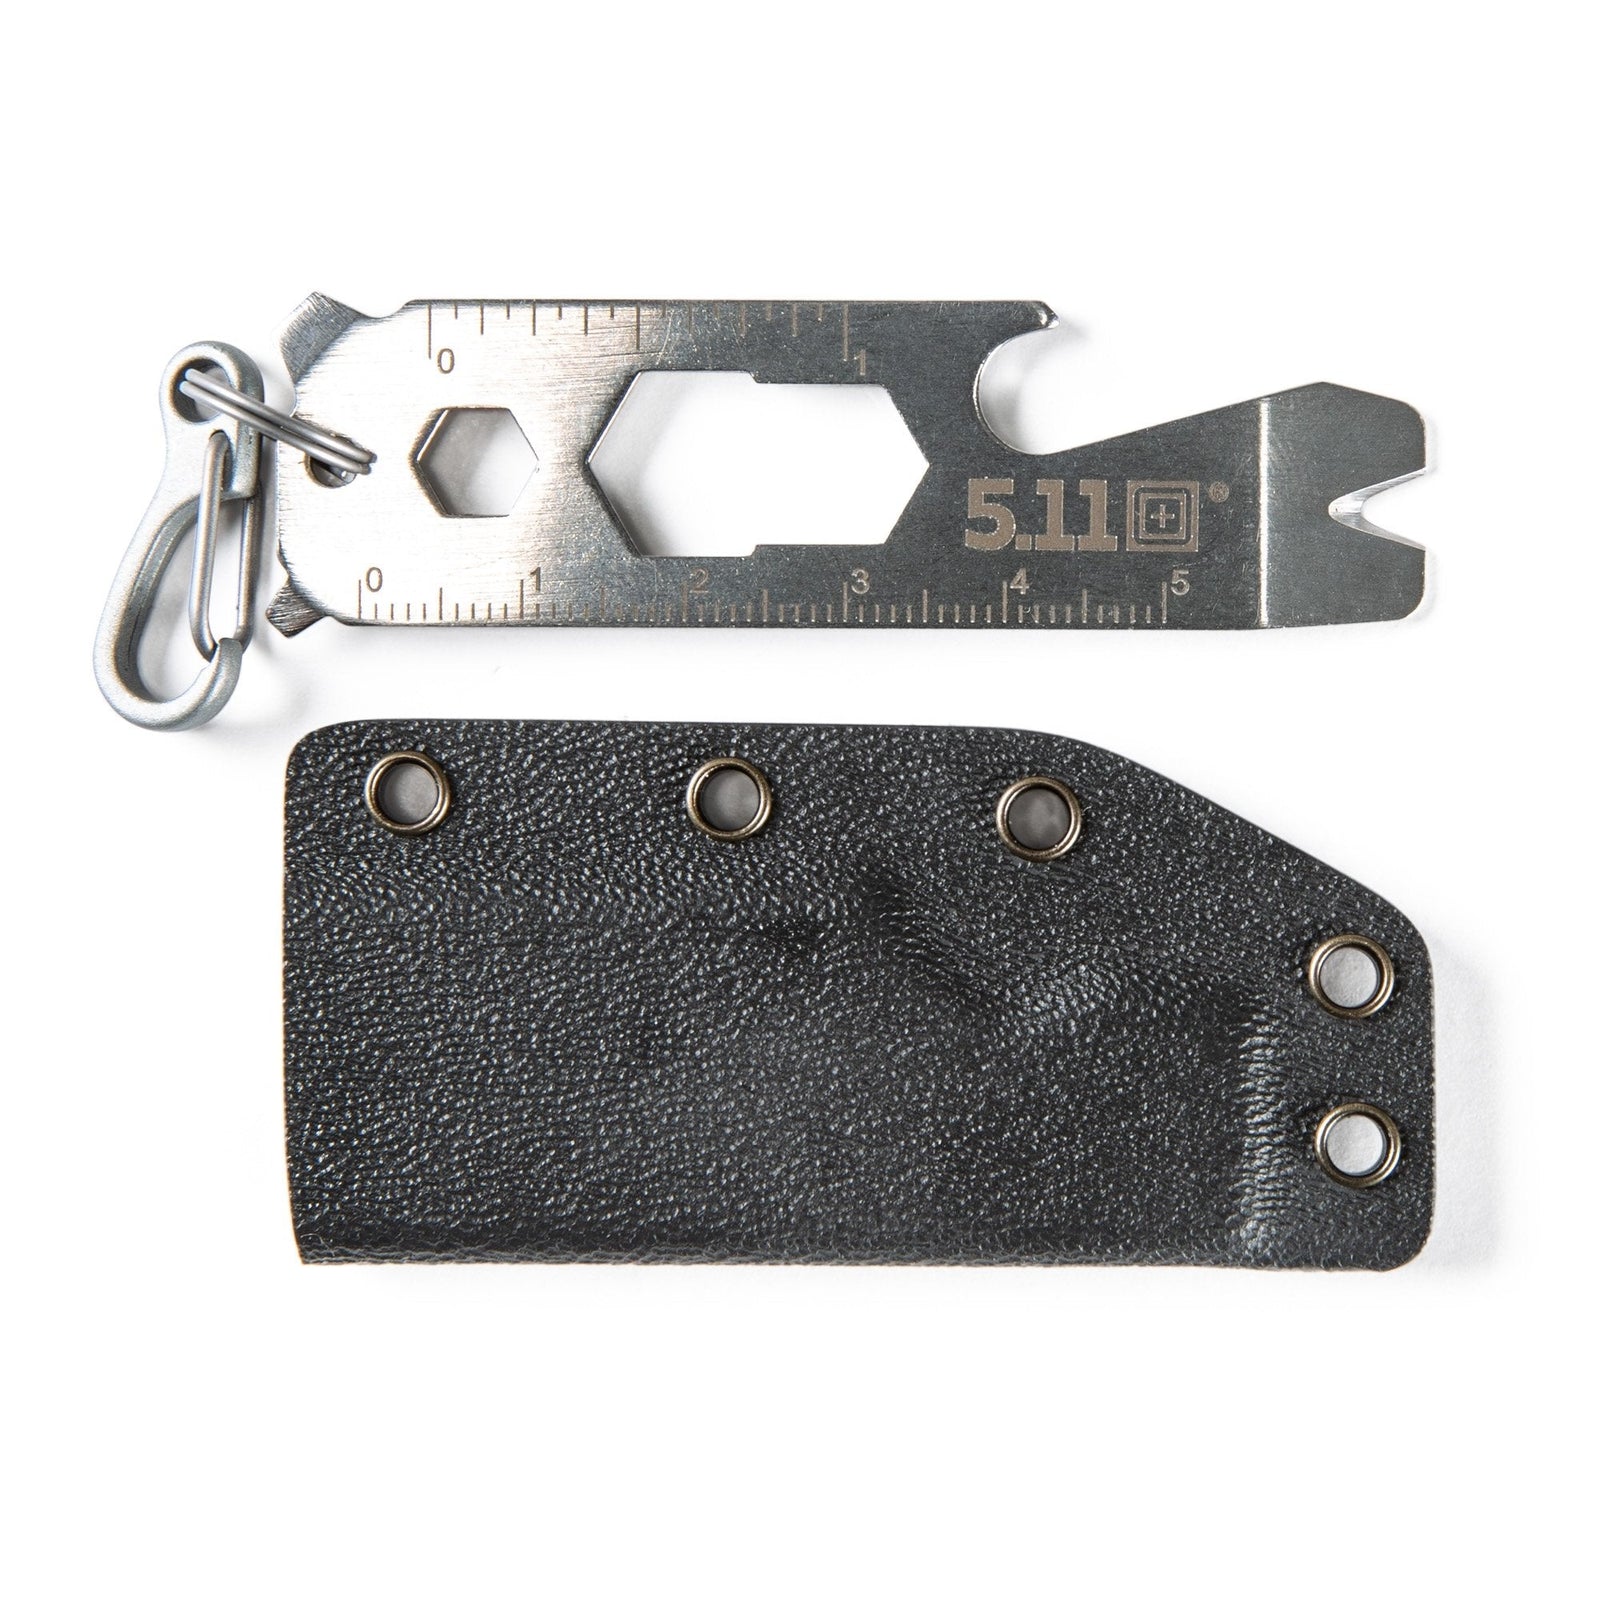 5.11 Tactical EDT Multi-Tool Black Gear Australia by G8